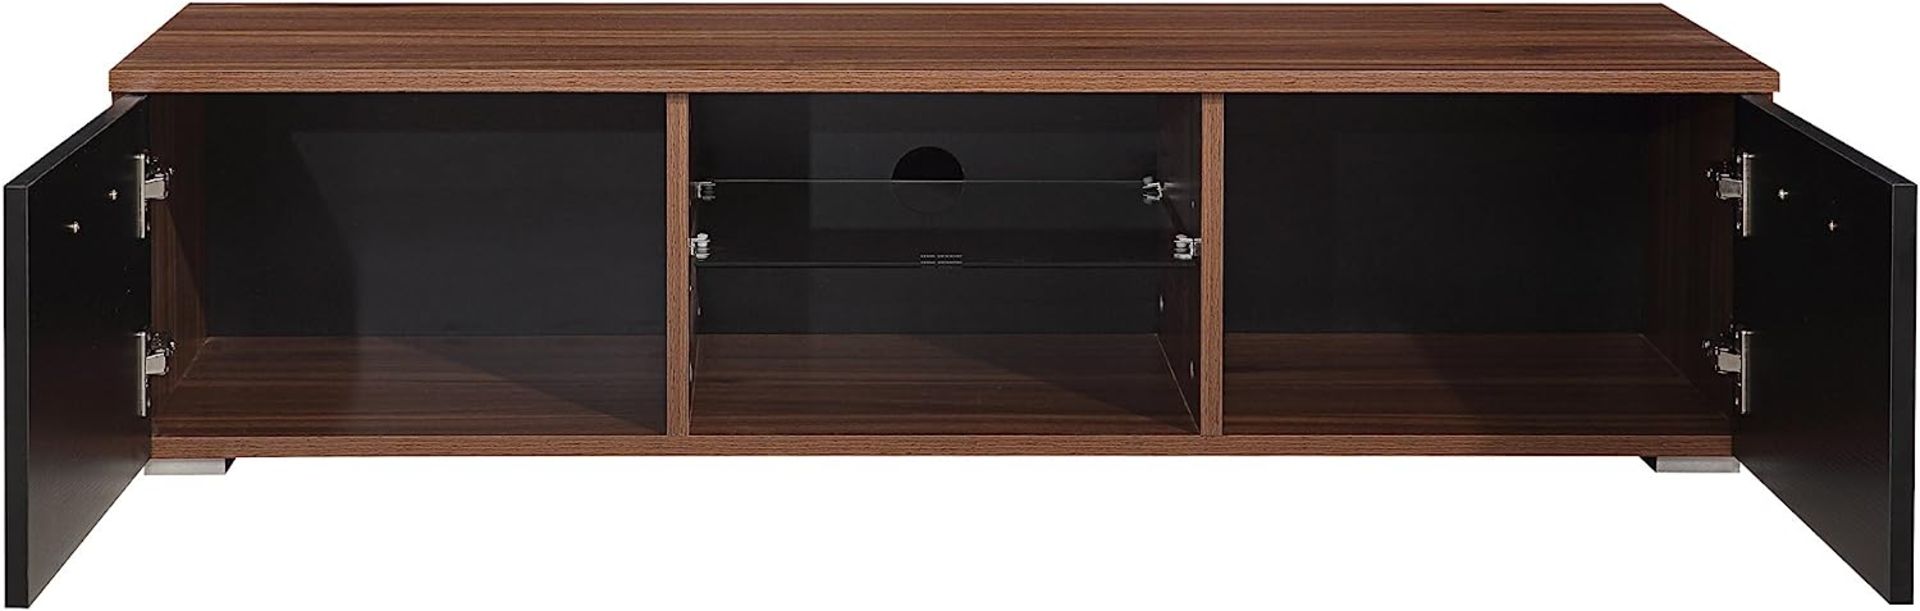 HARMIN MODERN 120CM TV STAND CABINET UNIT WITH HIGH GLOSS DOORS (BLACK ON WALNUT) - Image 5 of 8